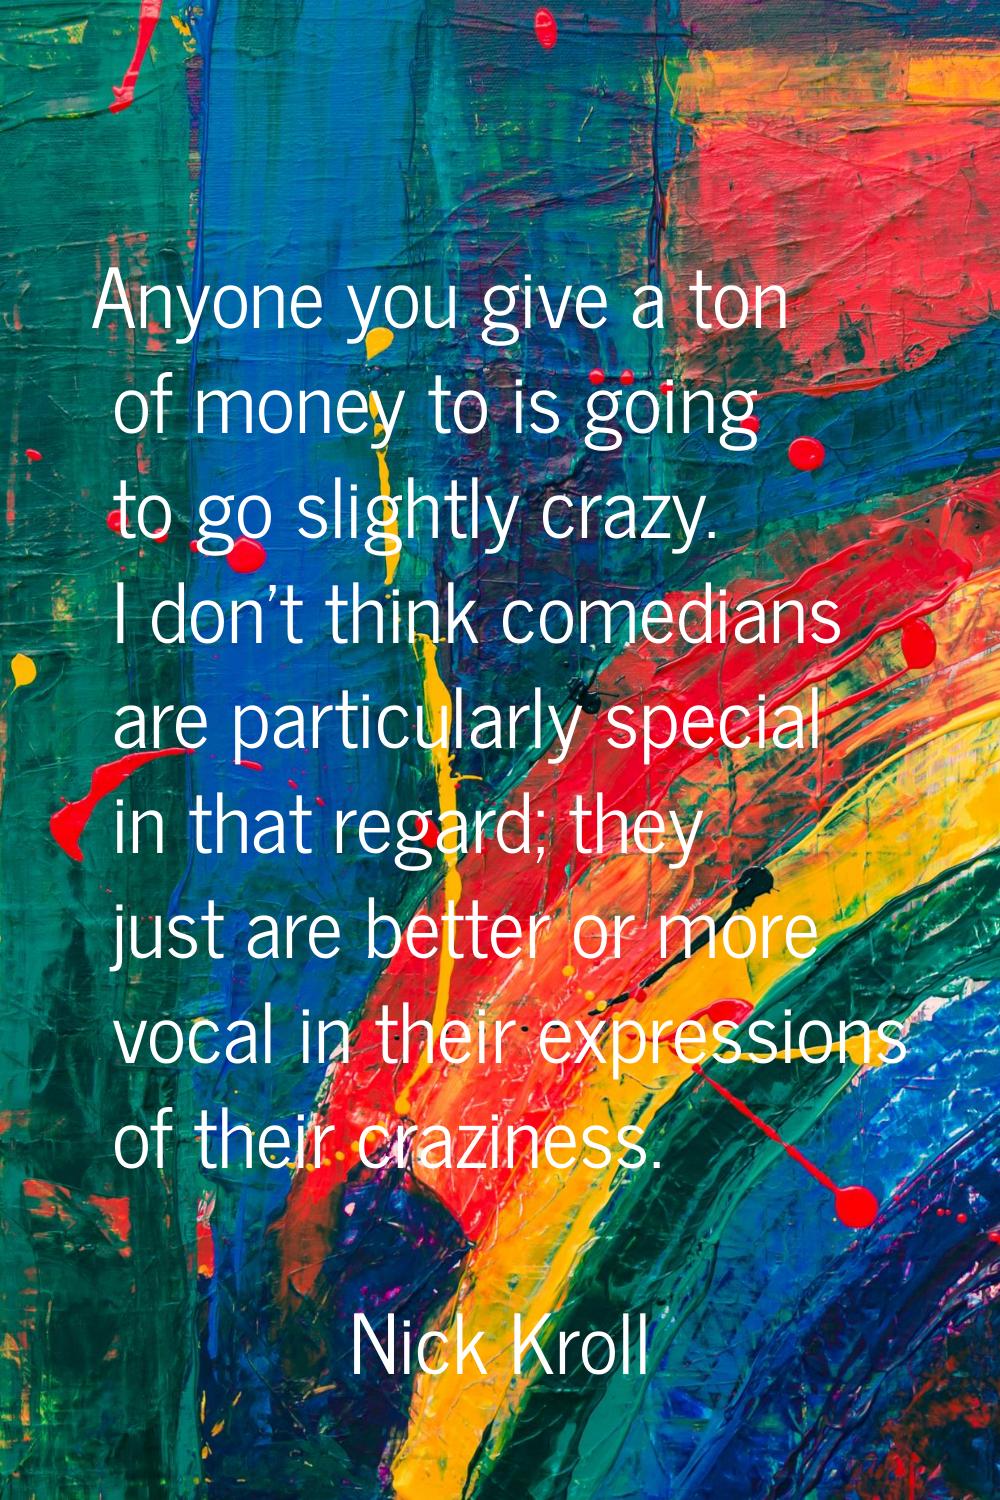 Anyone you give a ton of money to is going to go slightly crazy. I don't think comedians are partic